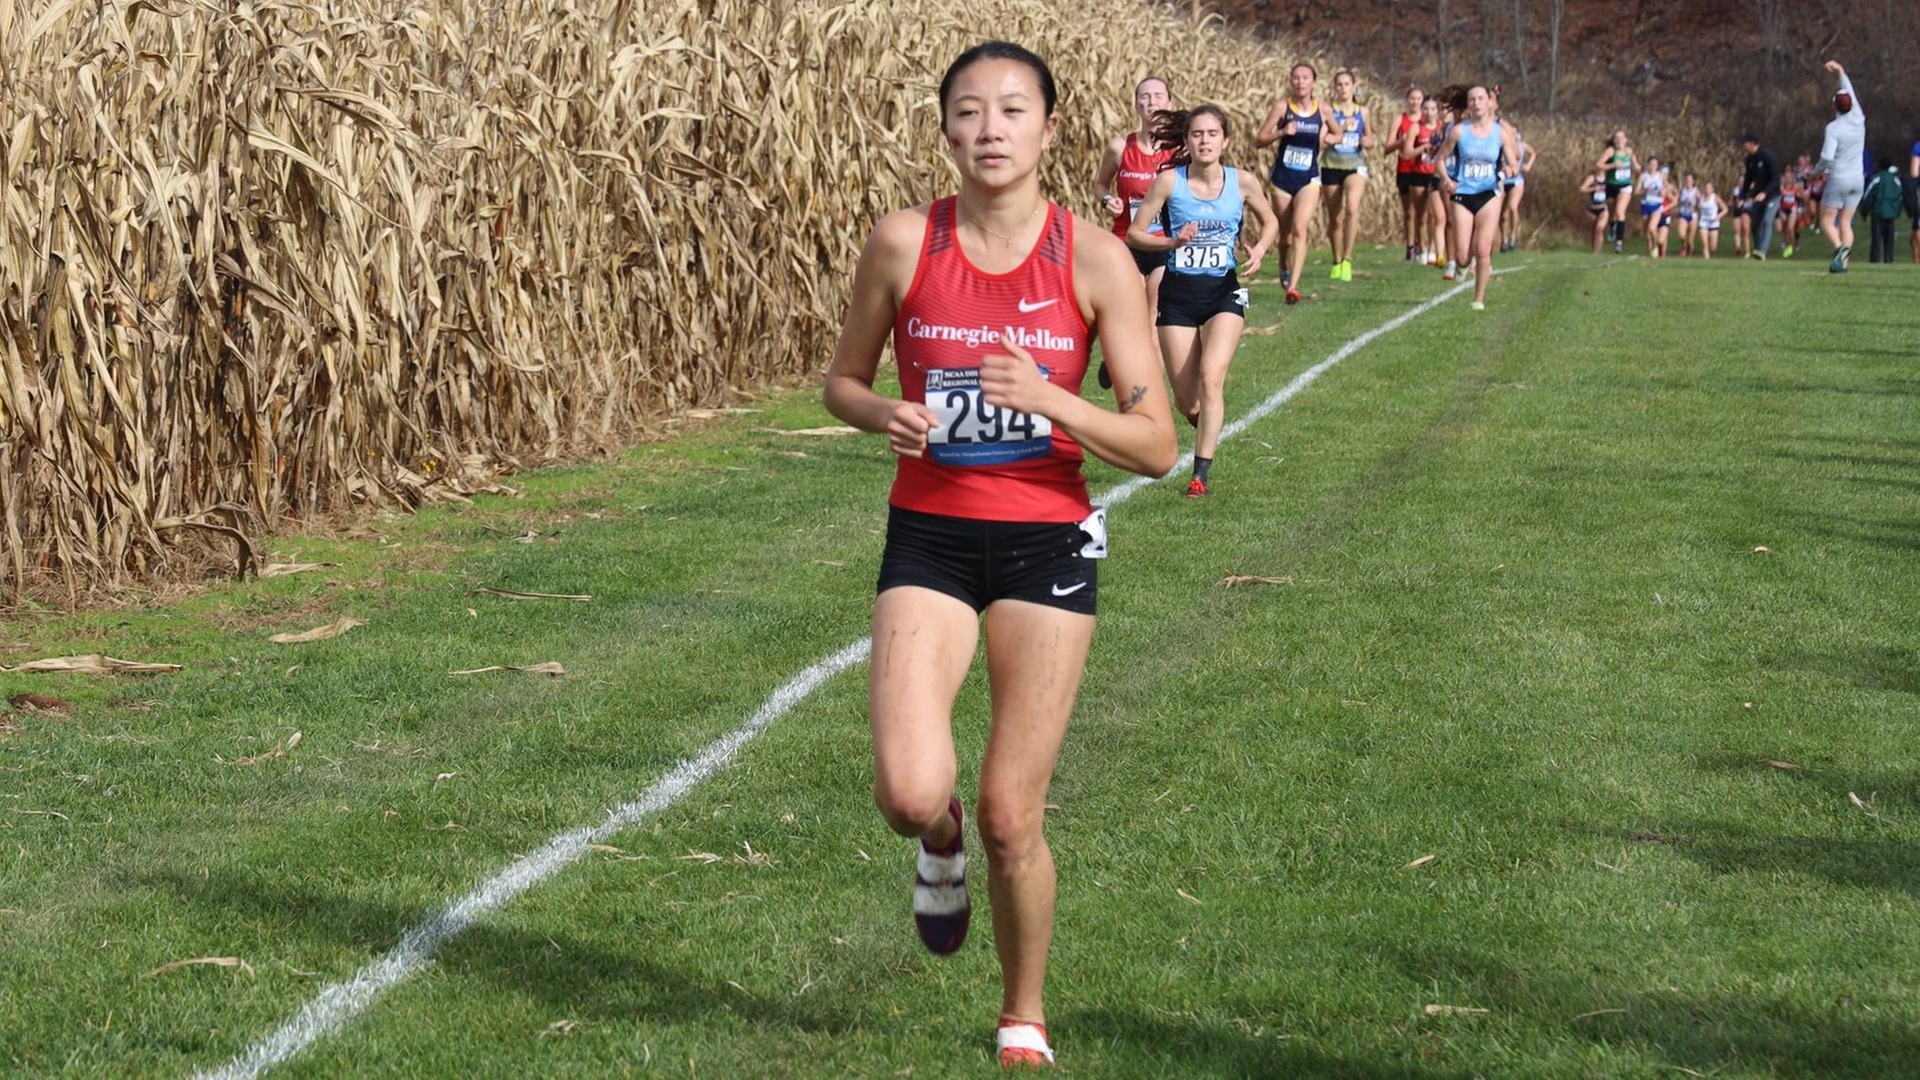 women's cross country runner wearing a red top and black shorts running by a cornfield with others behind her